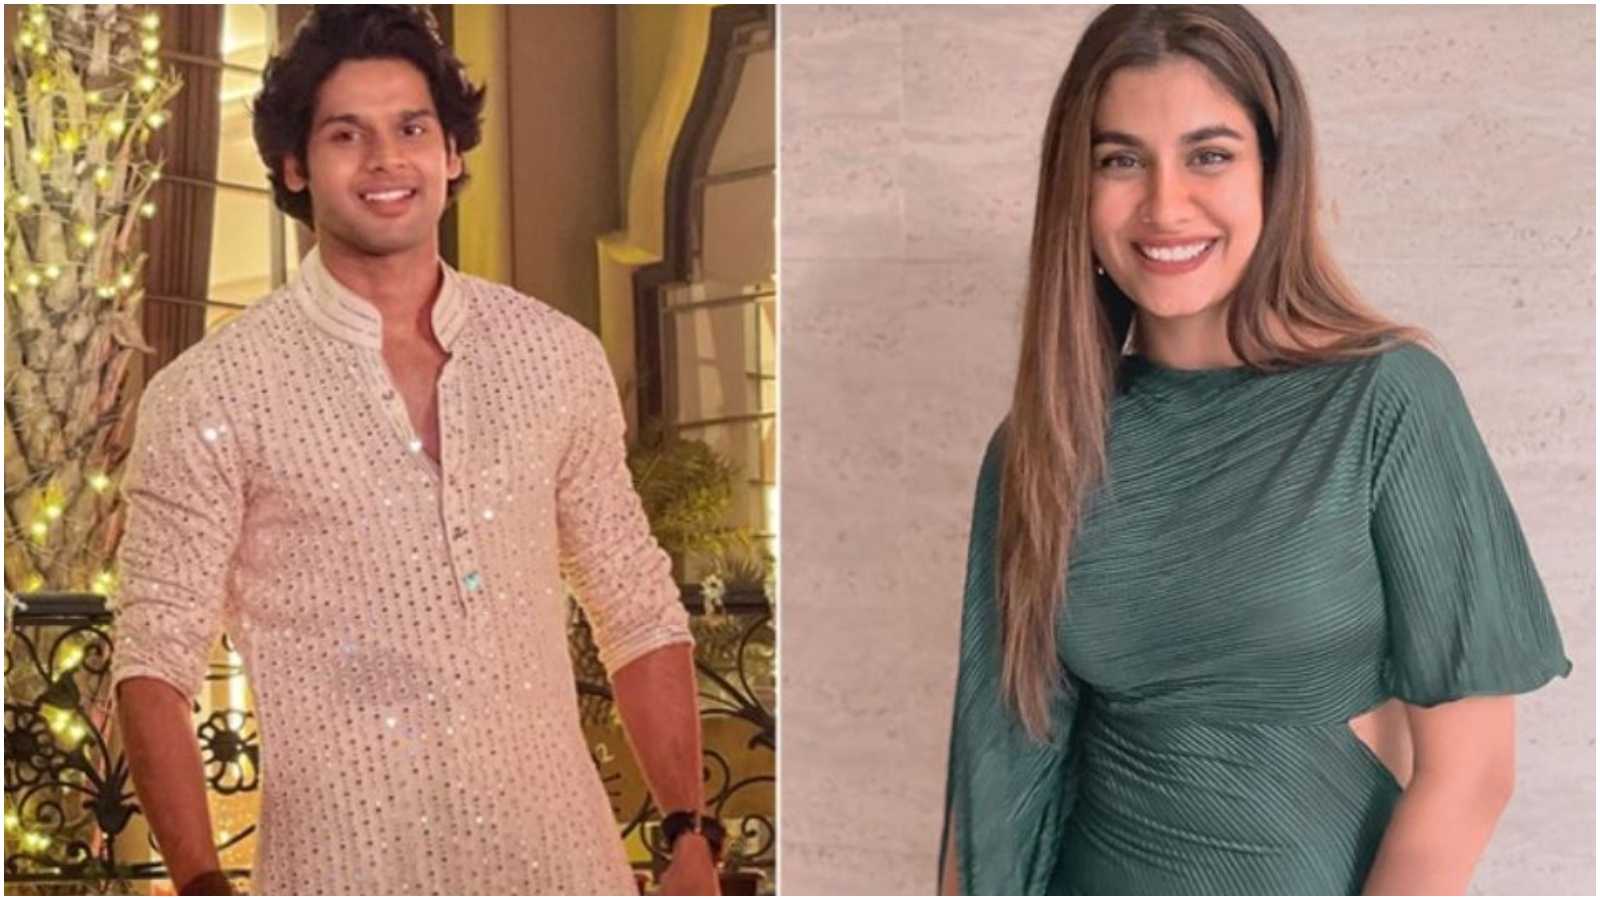 Is Abhimanyu Dassani dating Scam 1992 fame Shreya Dhanwanthary? Here's what we know